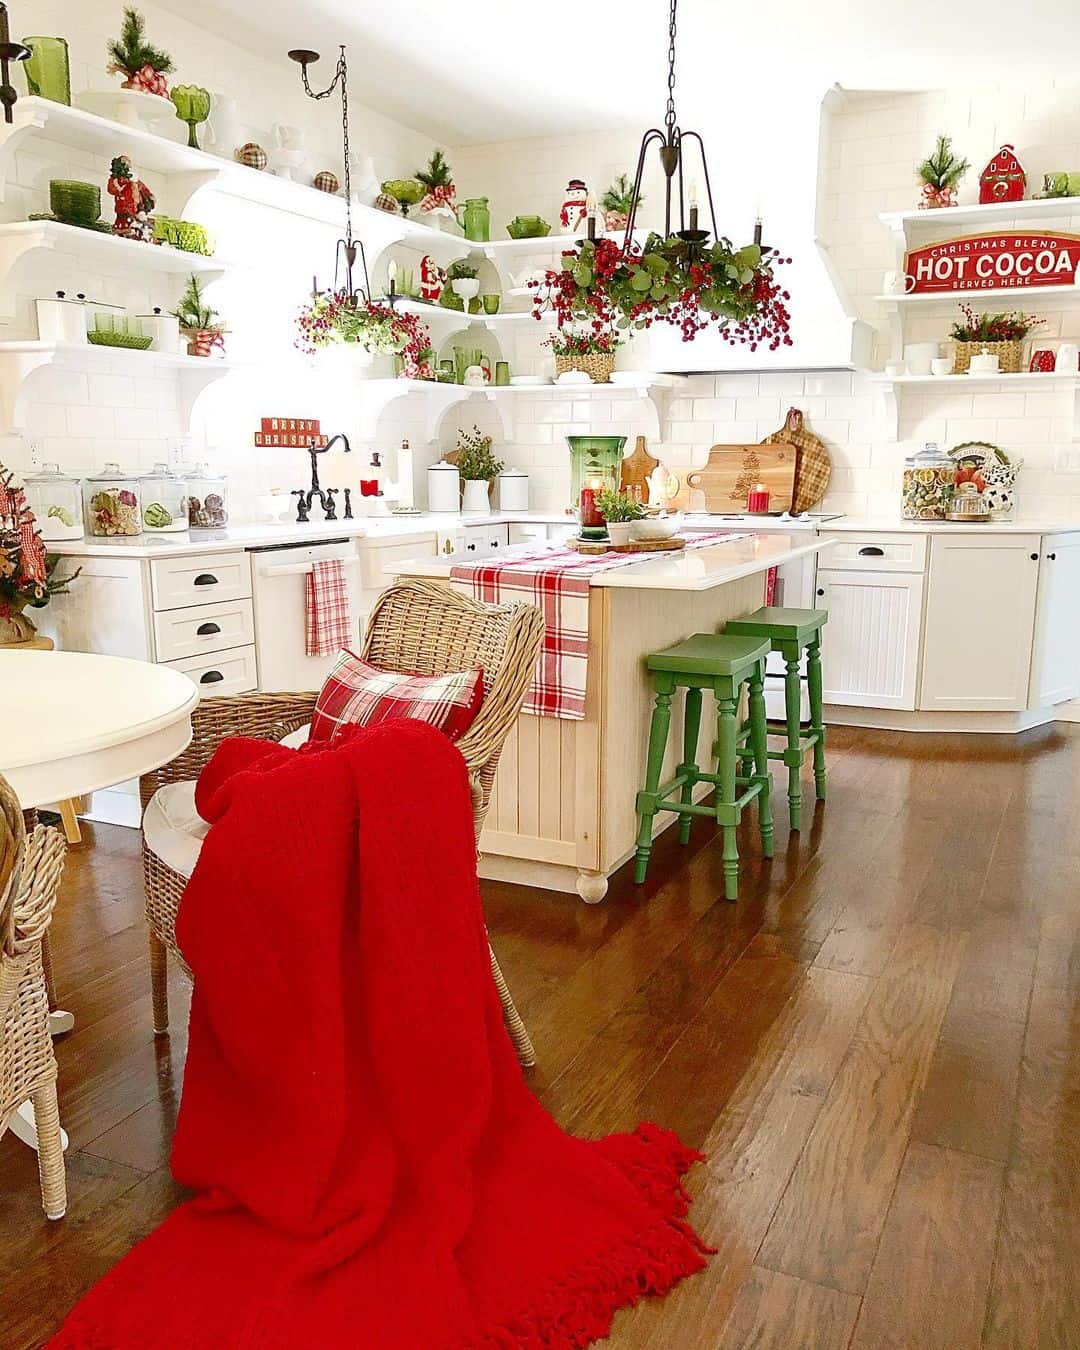 https://www.soulandlane.com/wp-content/uploads/2022/11/Green-and-Red-Kitchen-Accessories-in-a-Festive-Kitchen.jpg